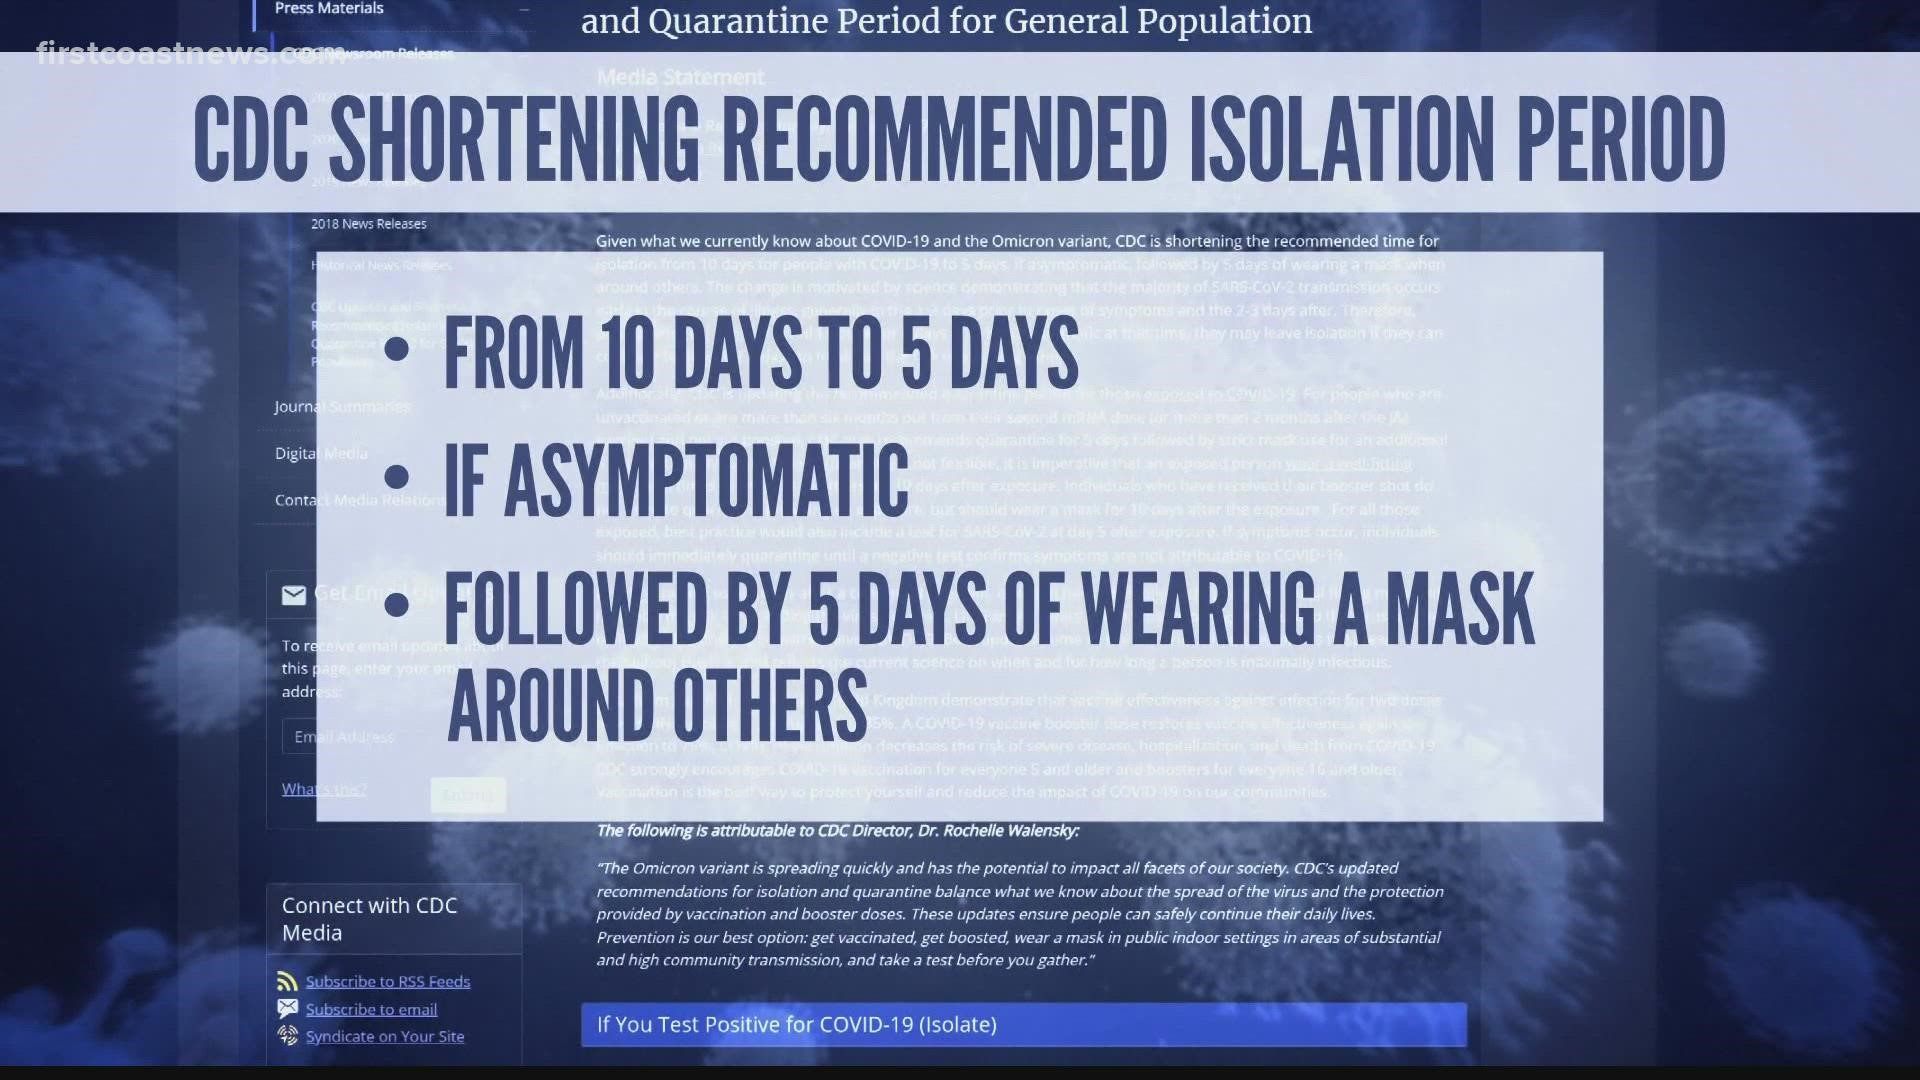 The CDC now recommends people who test positive and are asymptomatic to isolate for 5 days. The previous recommendation was 10 days.